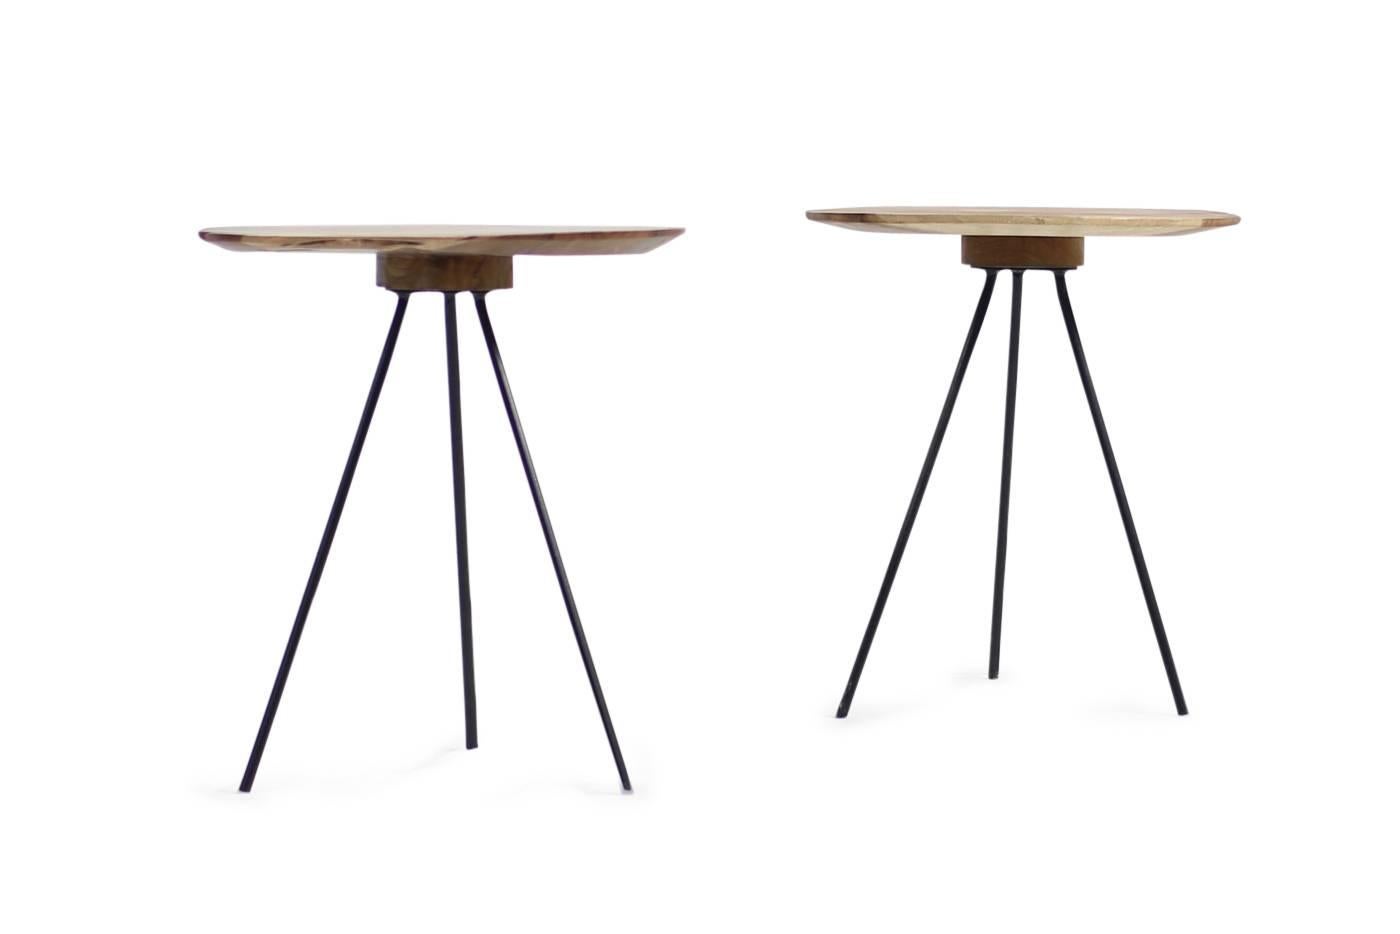 Beautiful set of two side tables, solid teak and iron, the tabletop is made of natural teak in an unique look. More tables available, each one is unique.